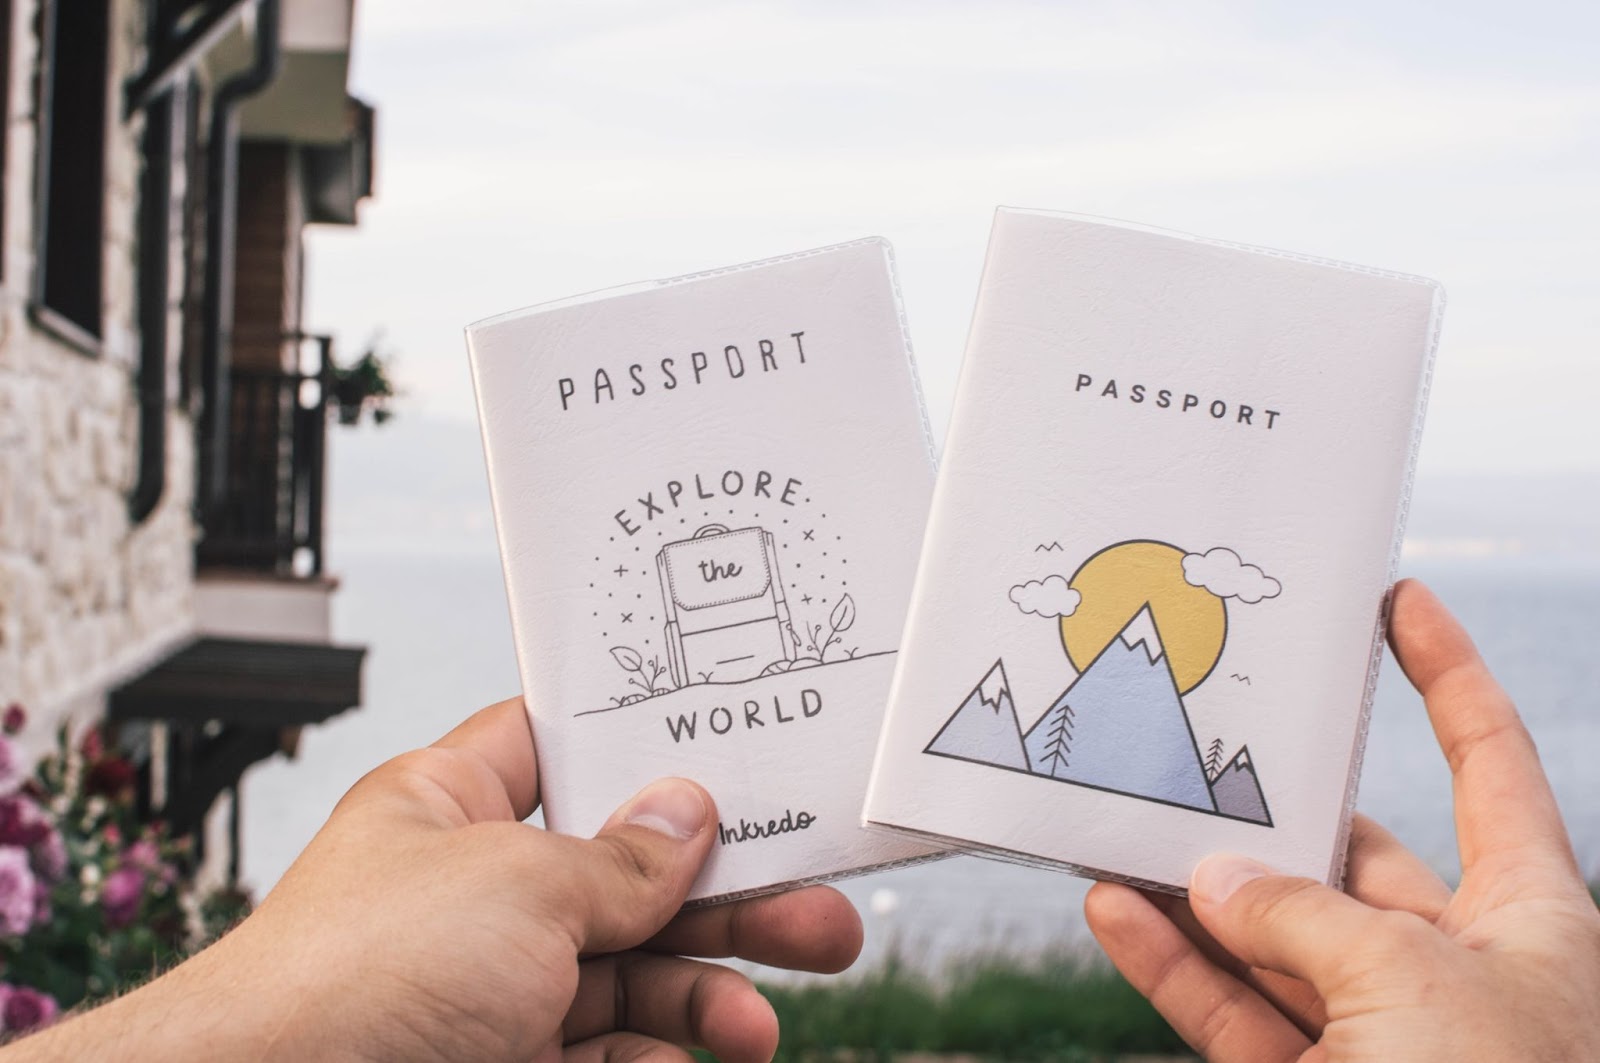 passport cases with "explore the world" written on them